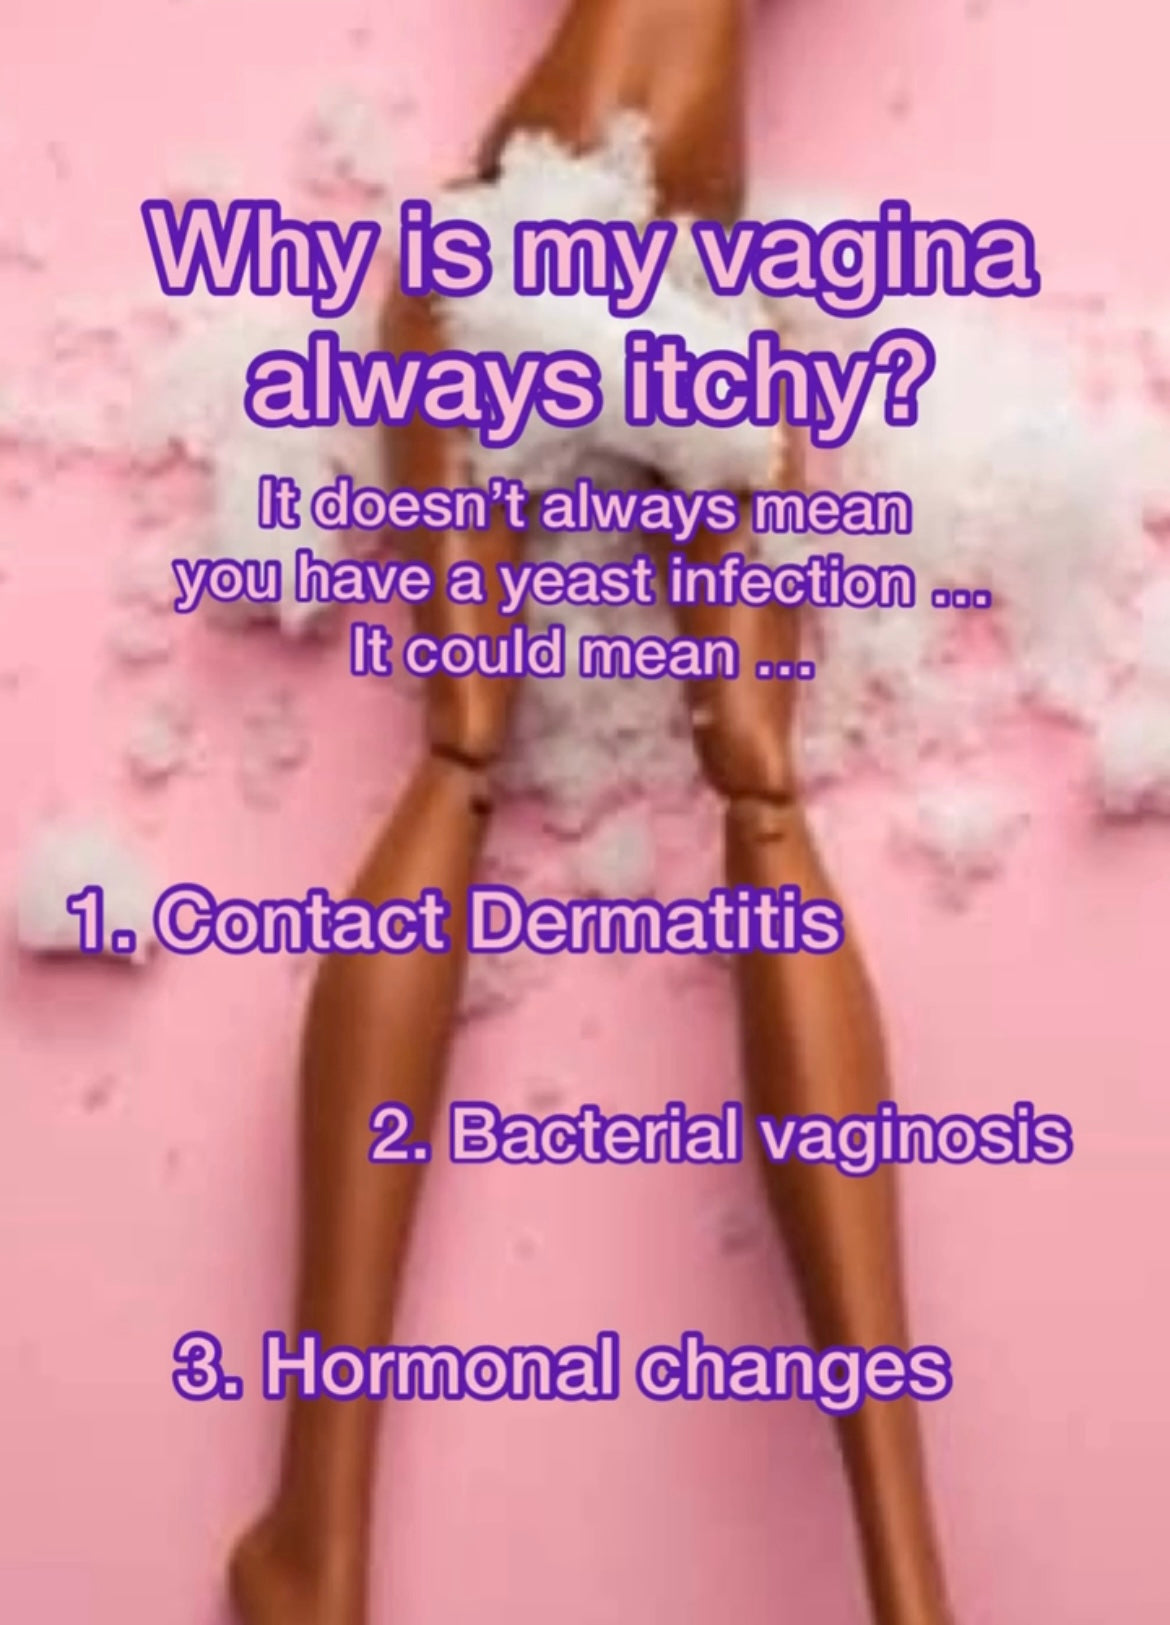 Itchy vagina after swimming in a pool? – V'licious